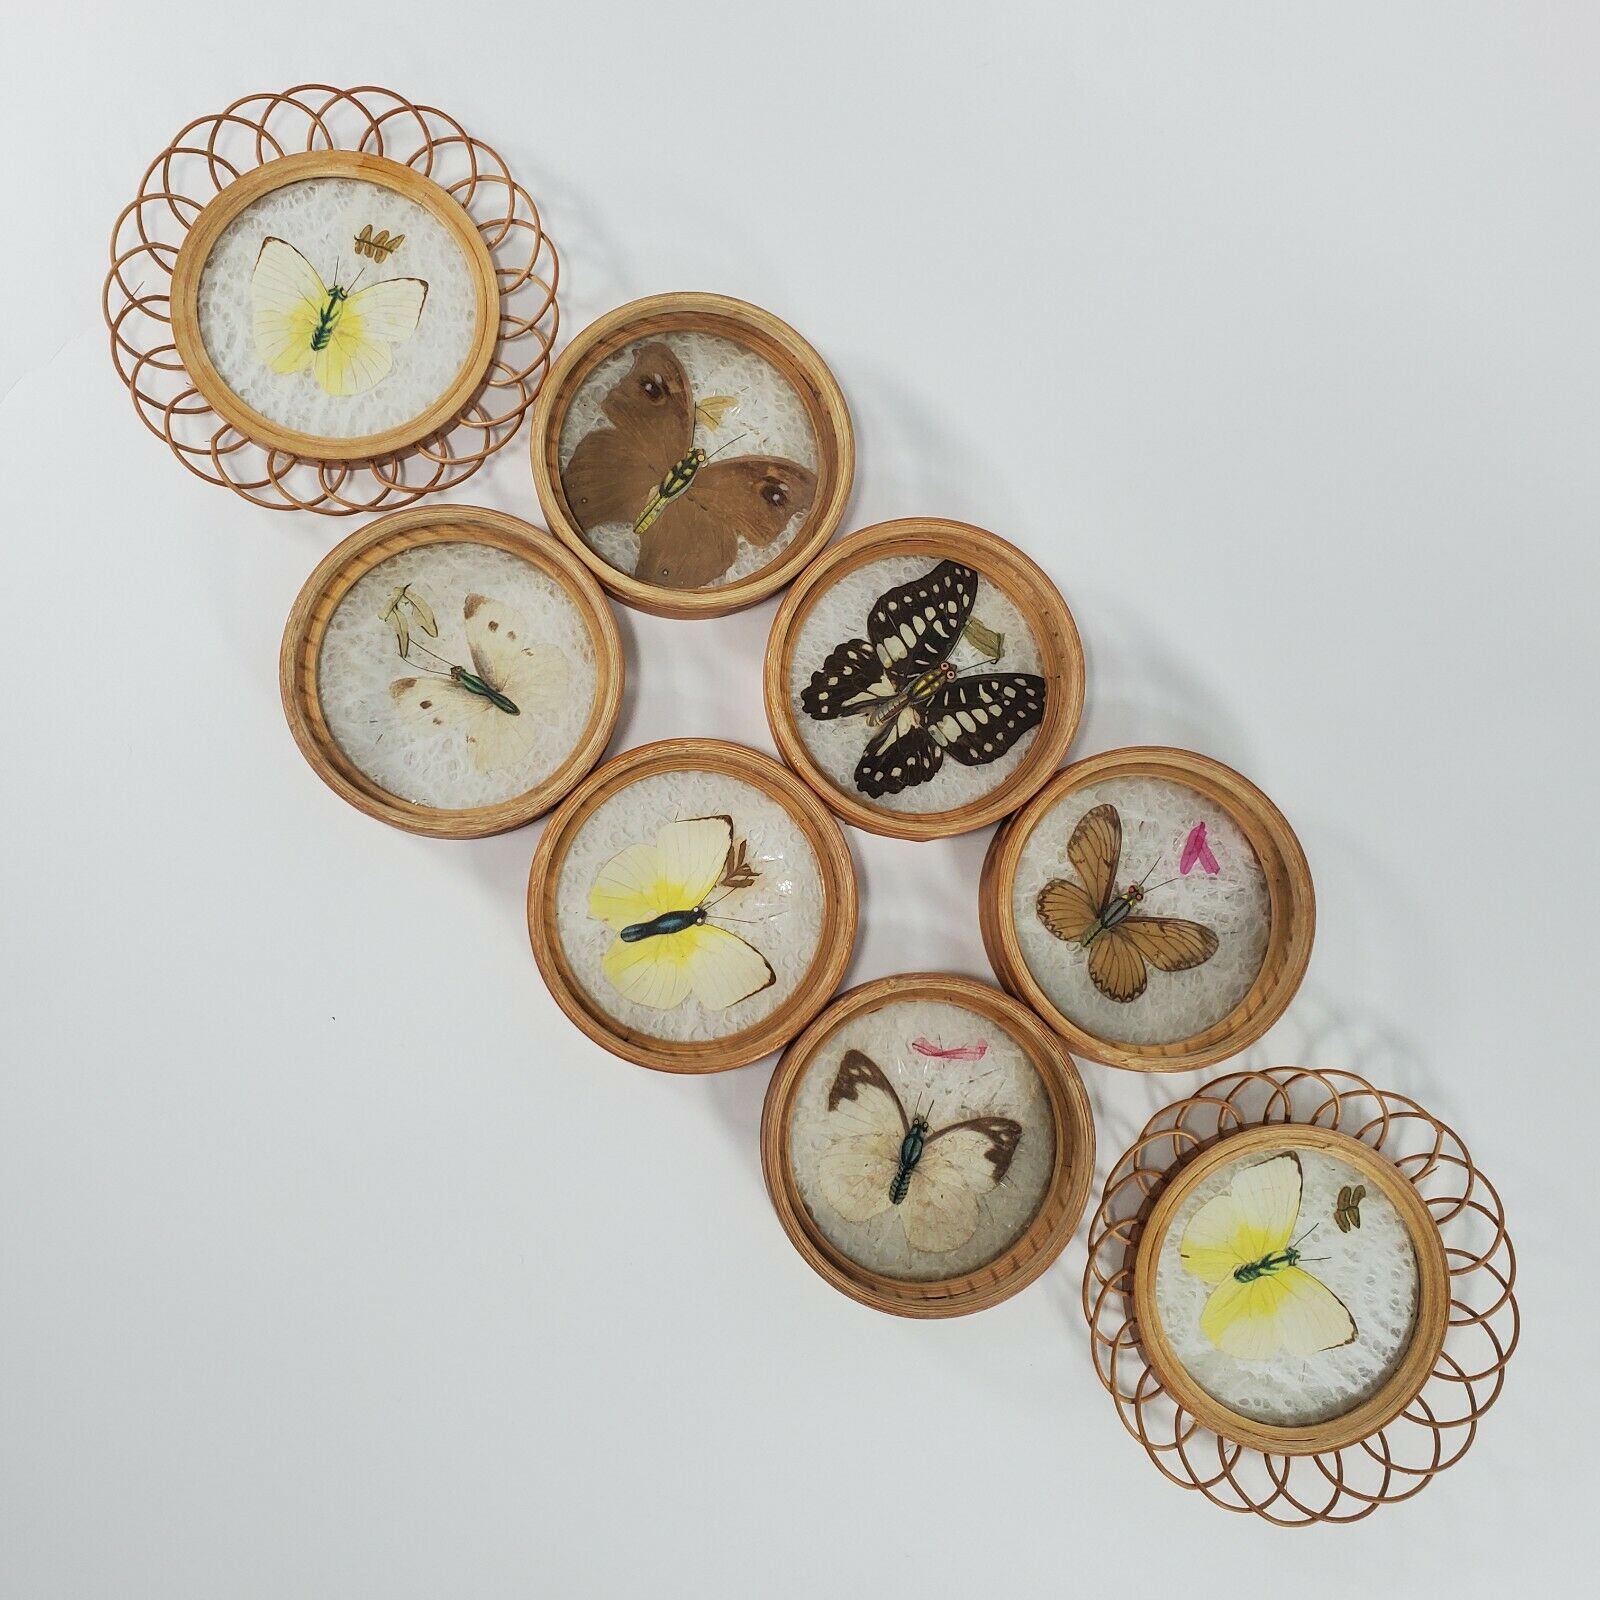 Vintage Pressed Butterfly Wicker Bamboo And Plastic Coasters Set Of 6 + 2